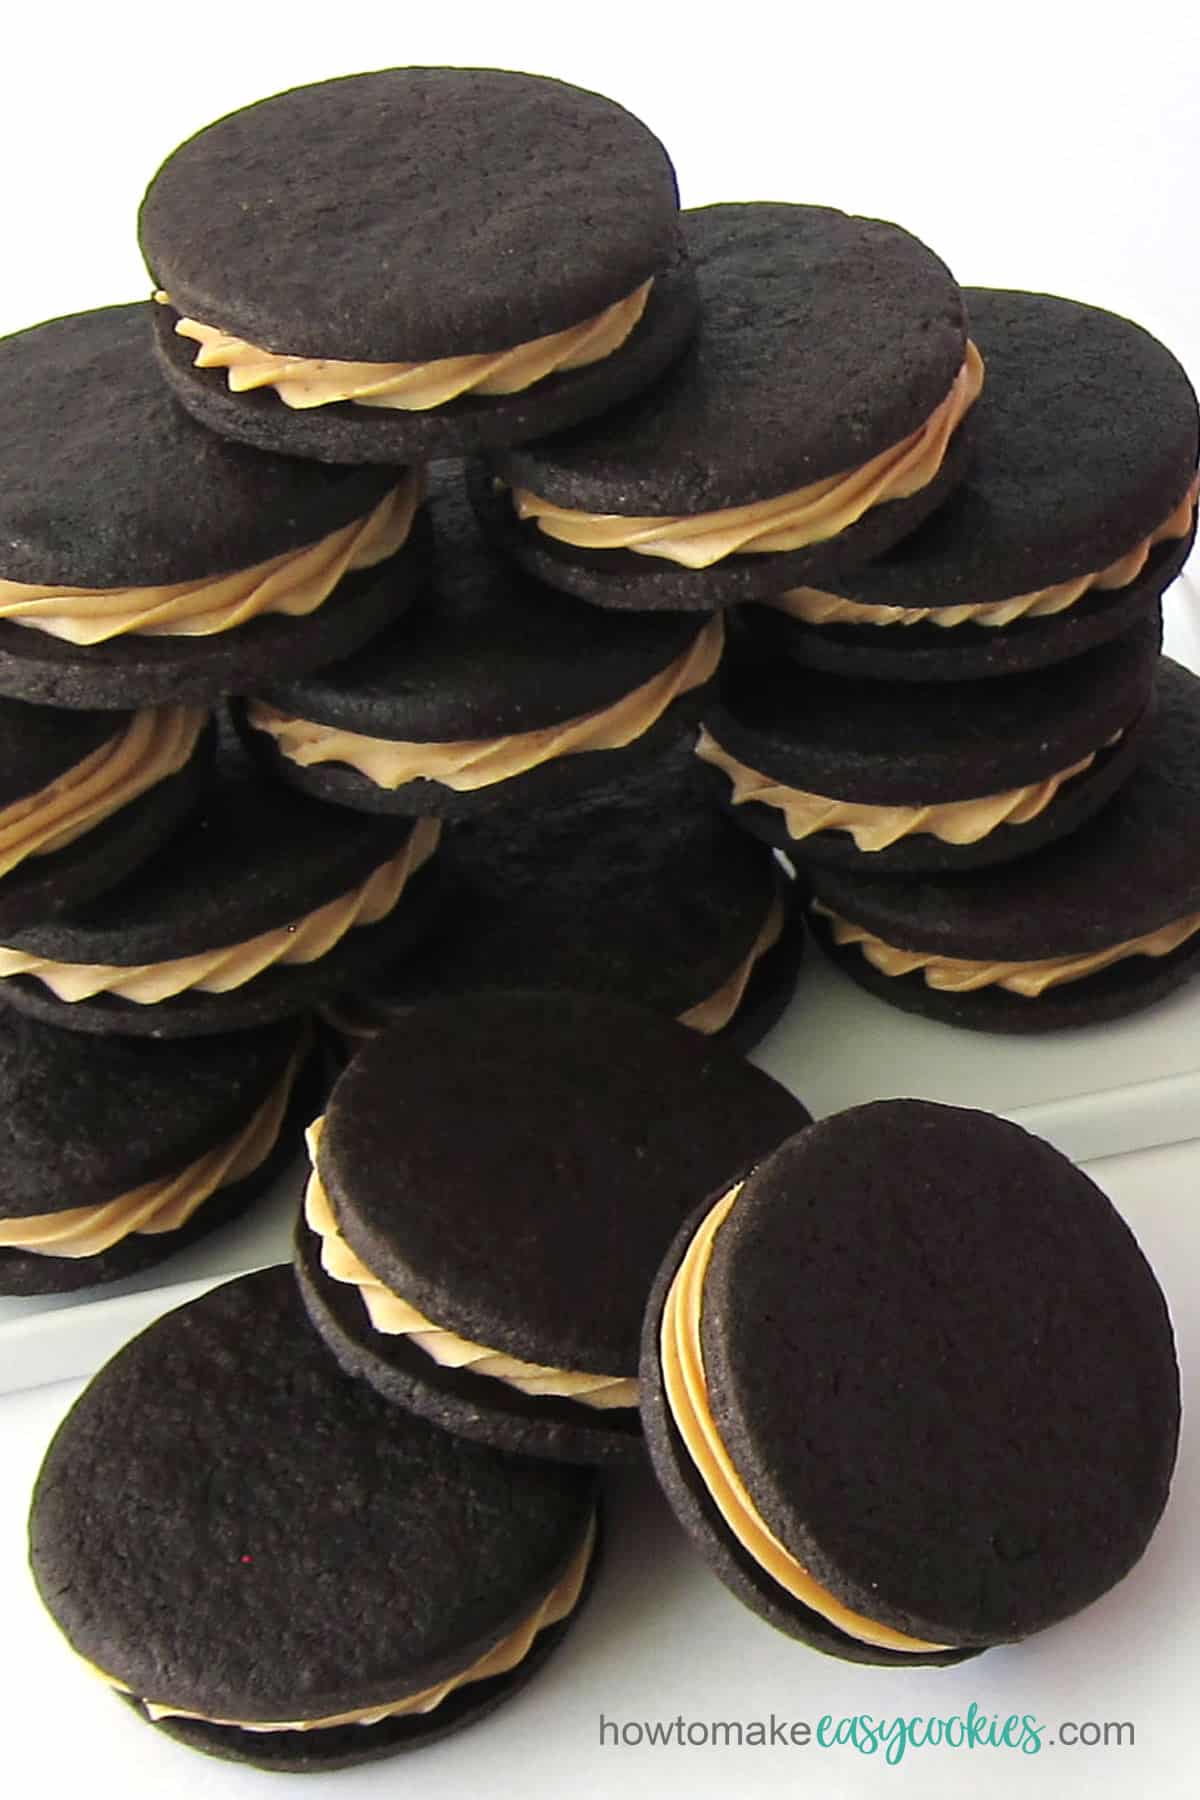 Dark chocolate cookies with peanut butter fudge filling inside.